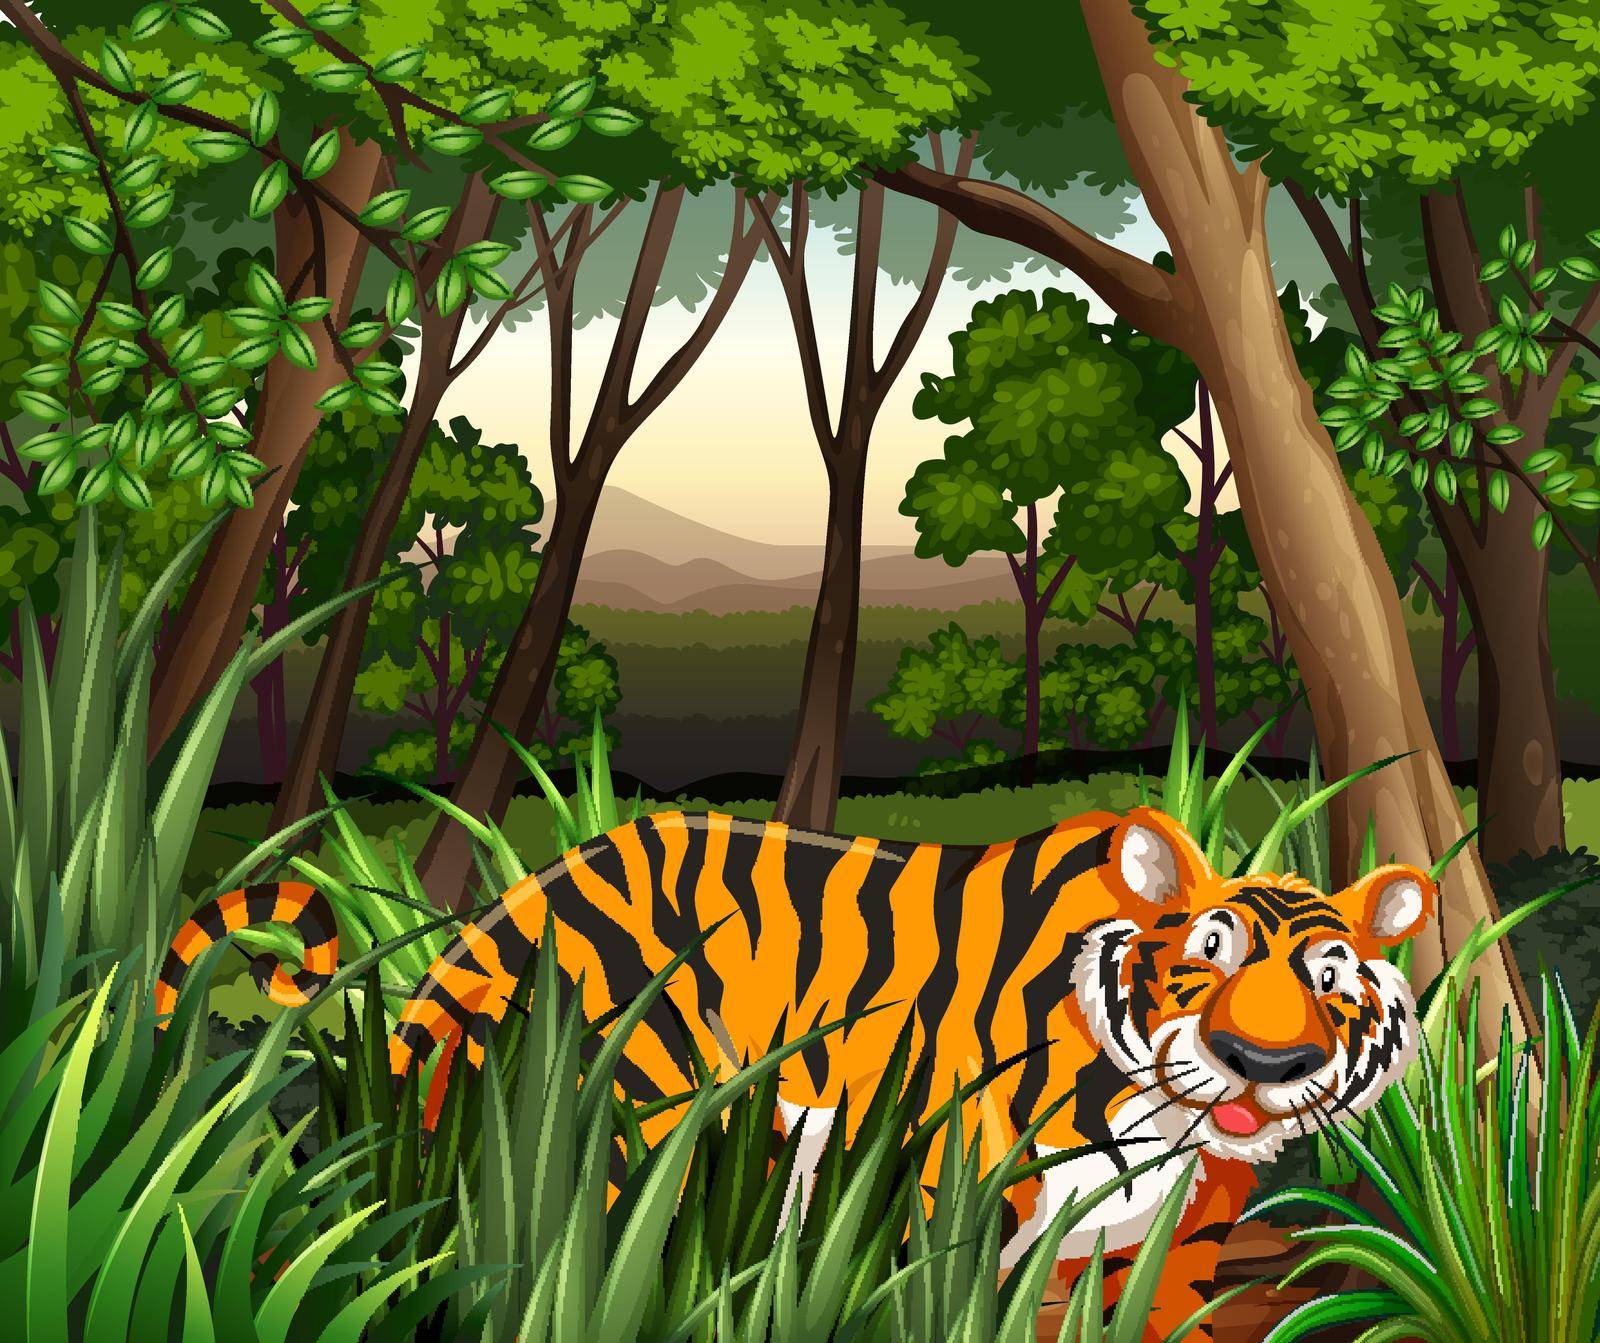 Scenery of a tiger walking in a jungle